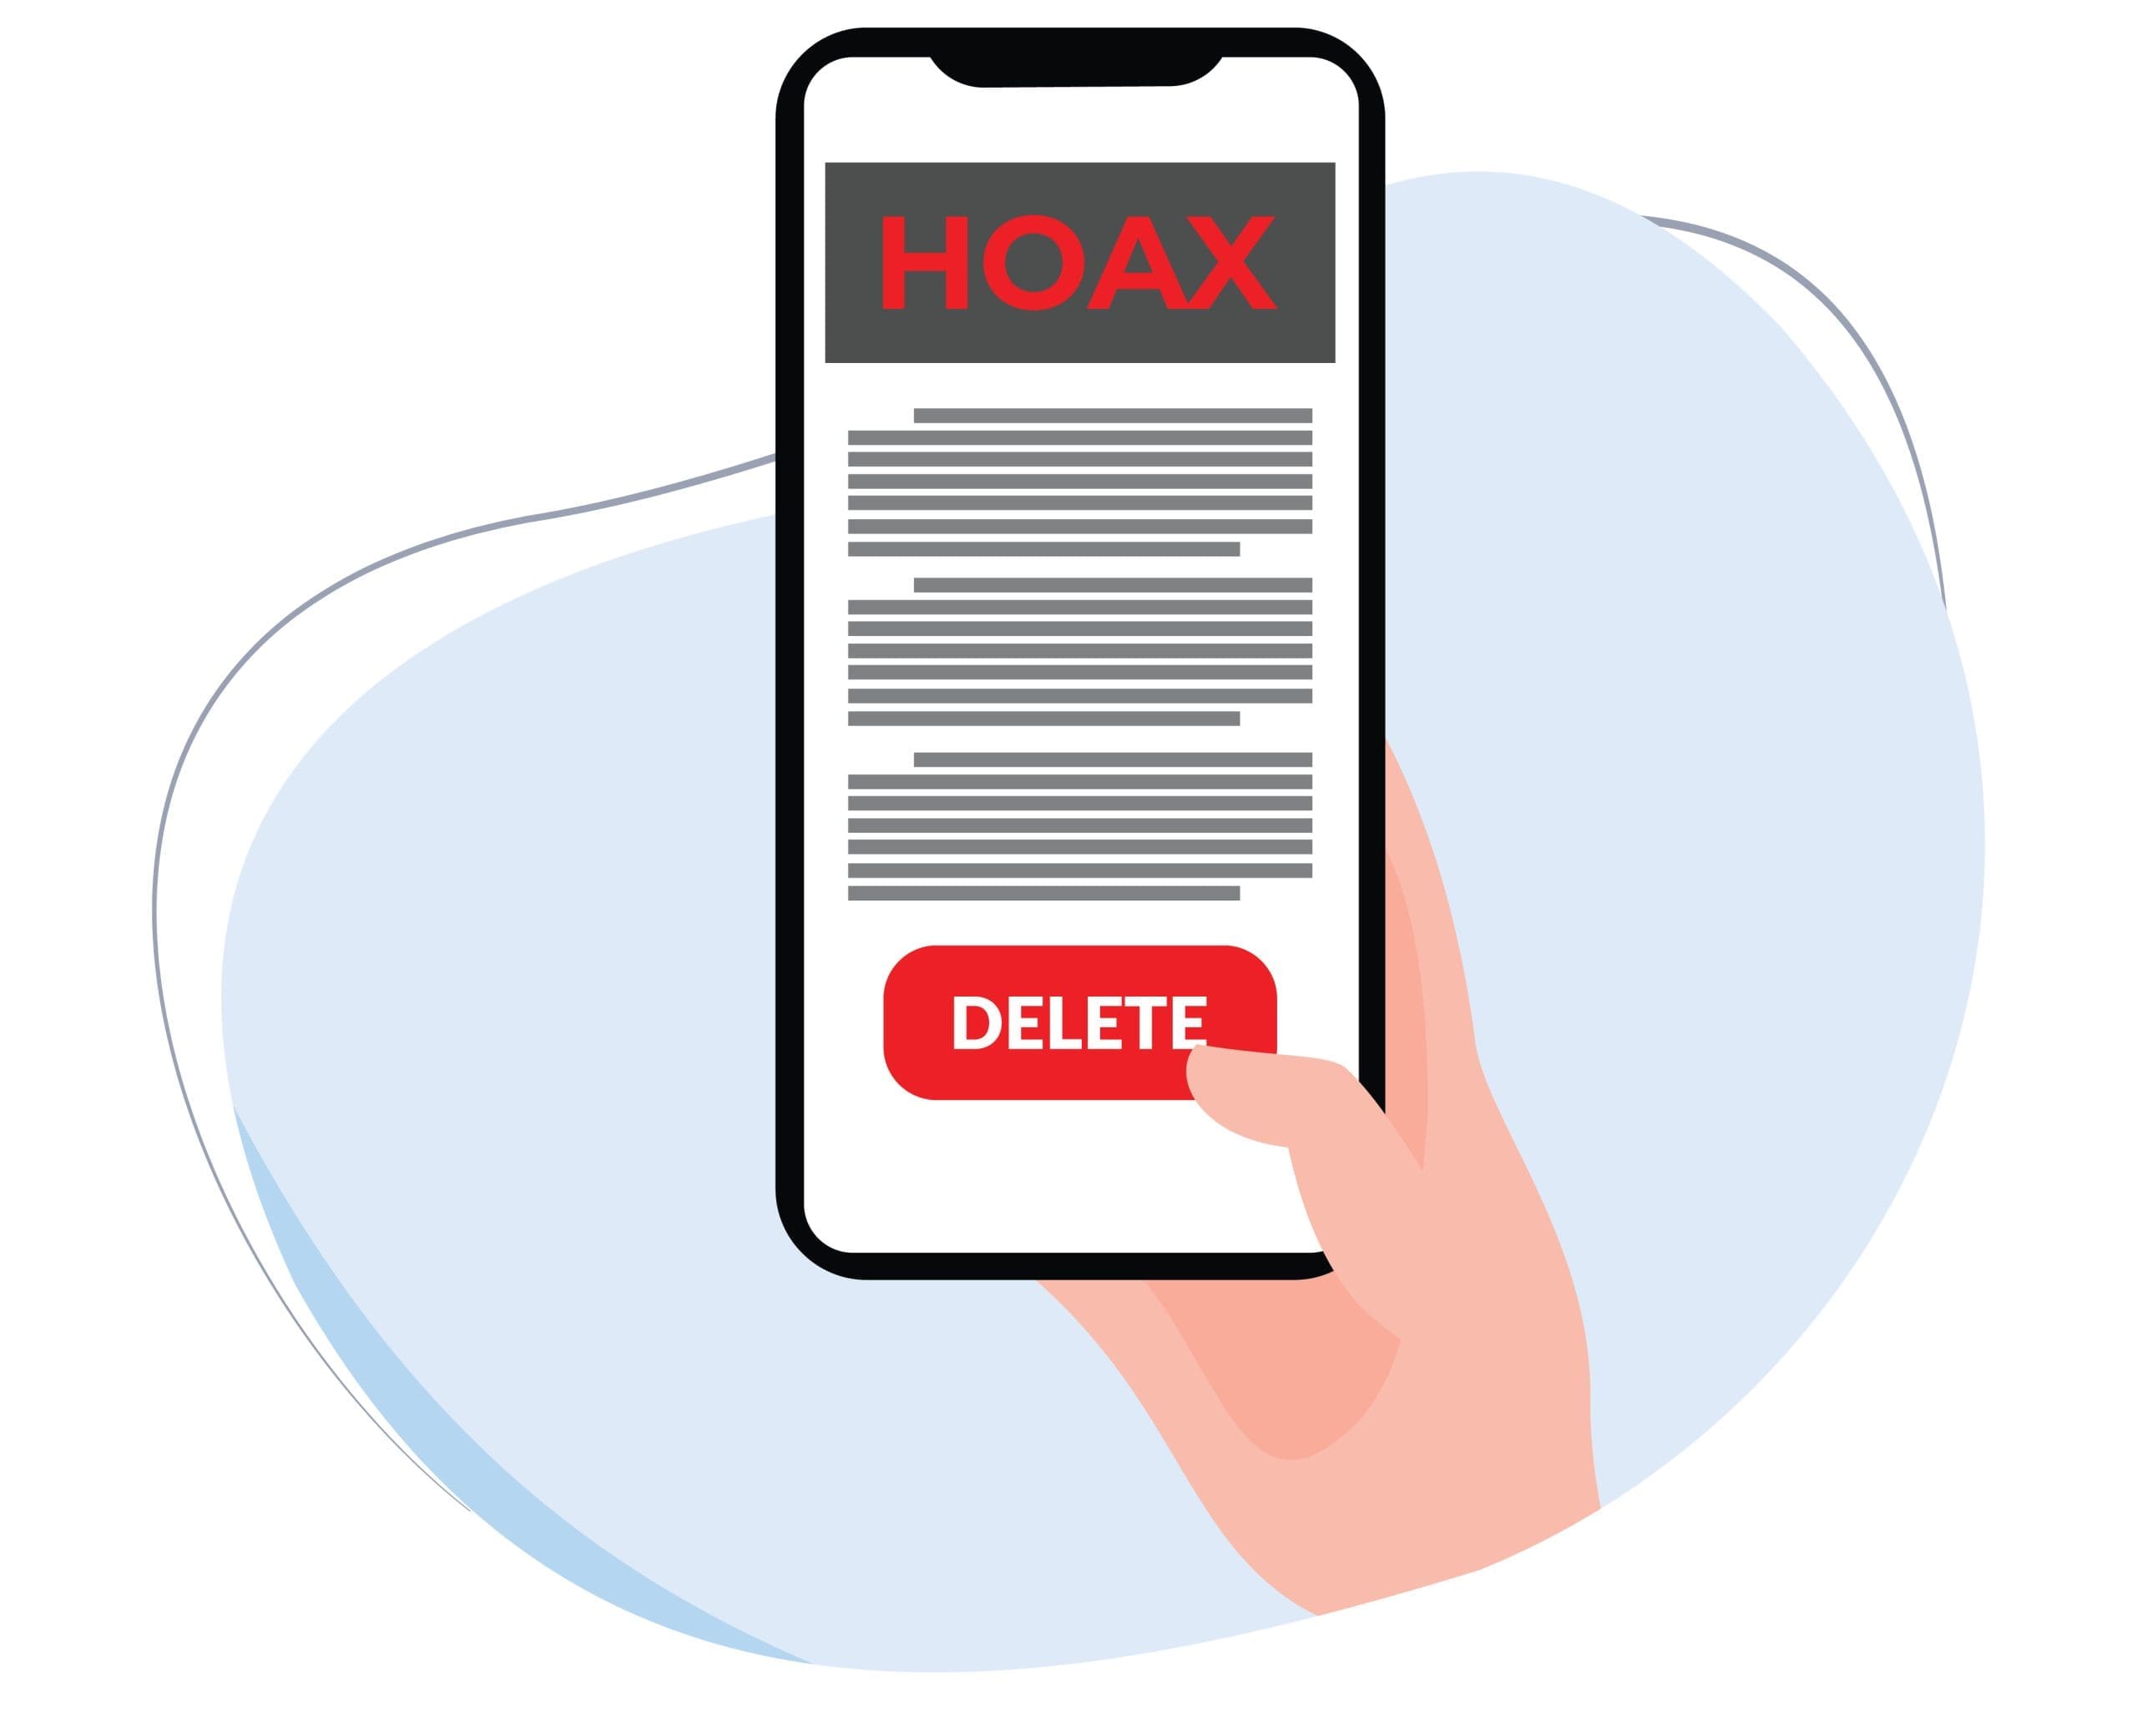 A person deleting a hoax alert from their smartphone screen.